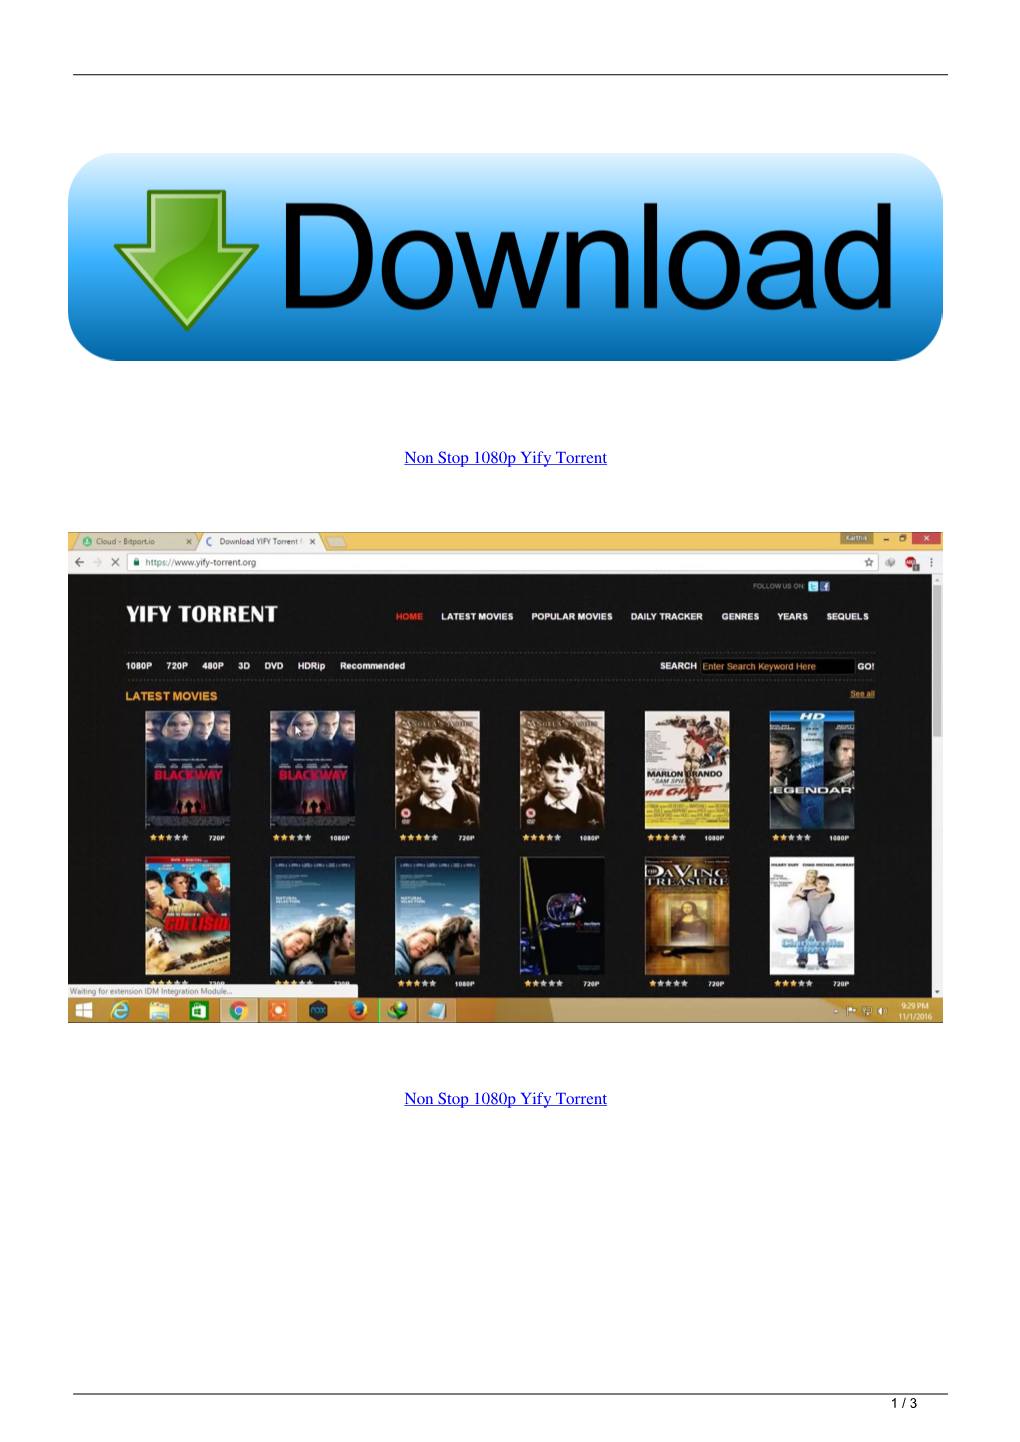 Non Stop 1080P Yify Torrent